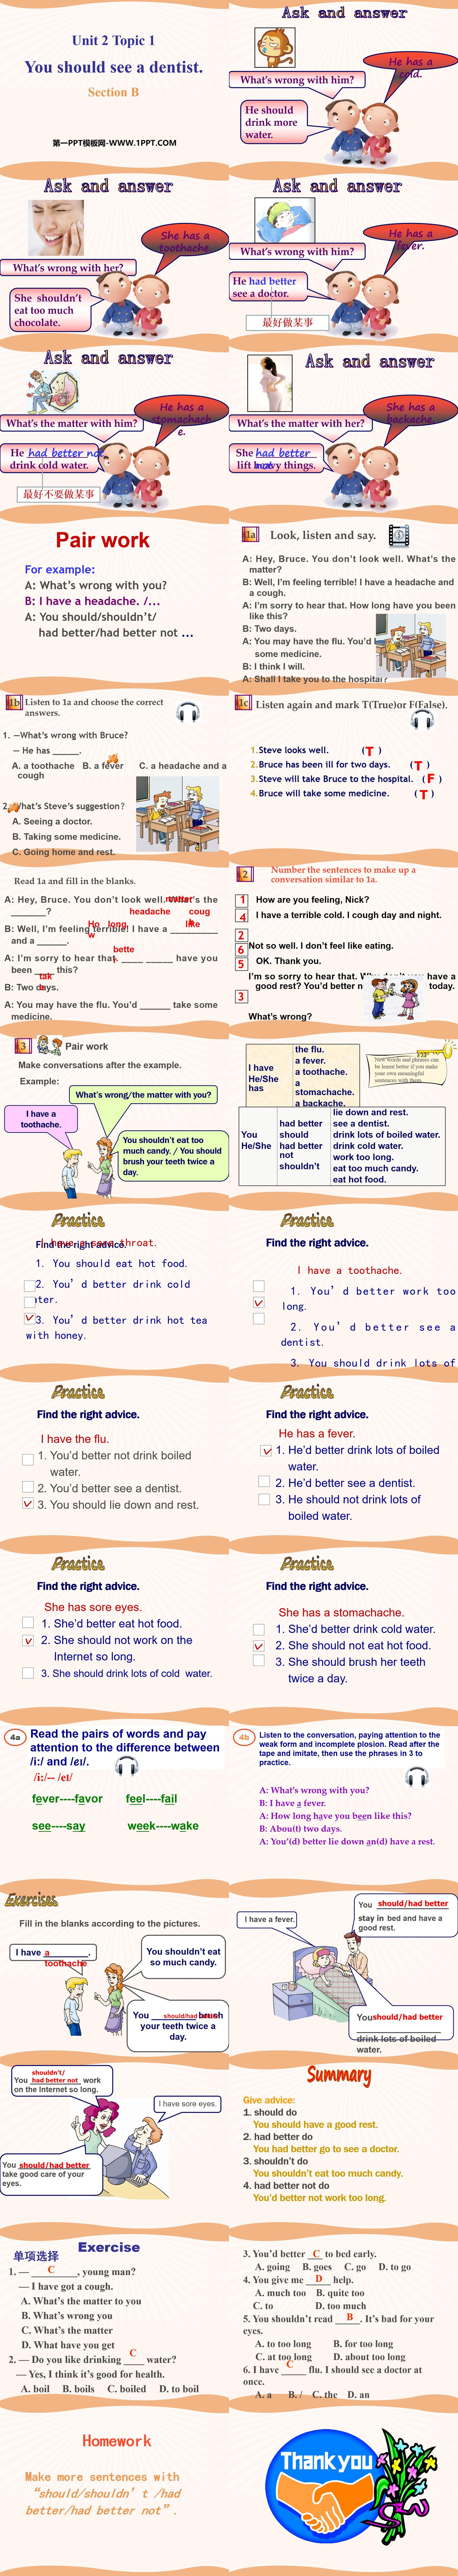 《You should see a dentist》SectionB PPT
（2）